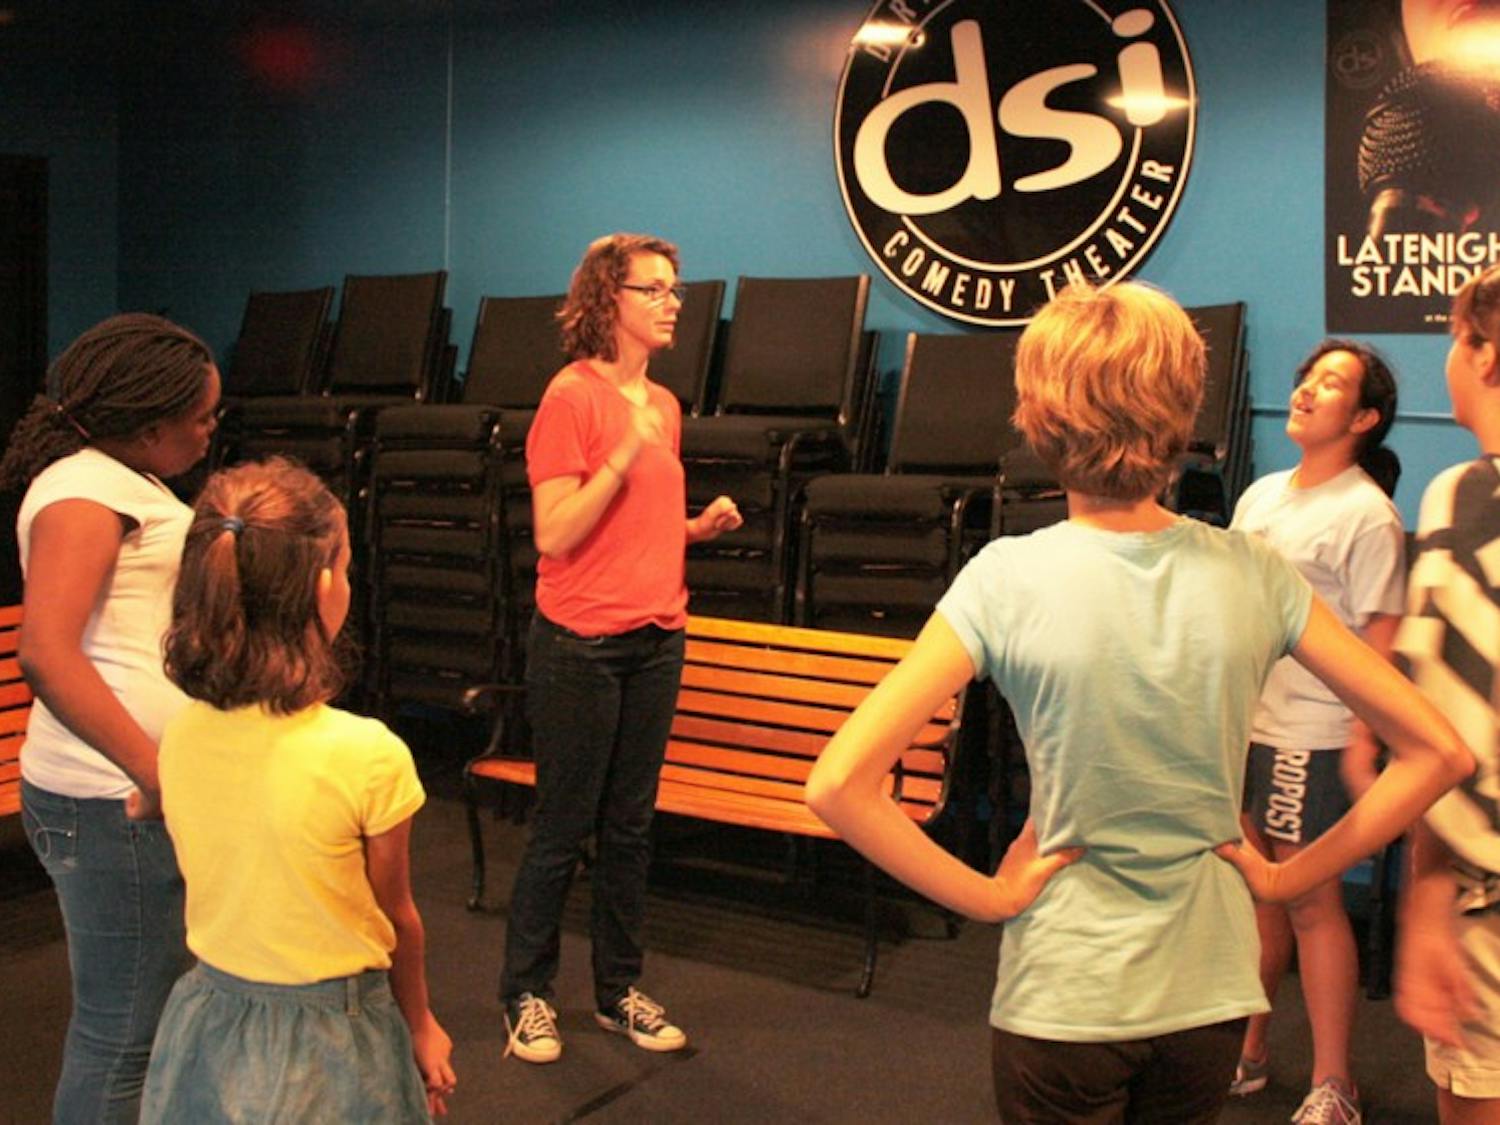 Impower is a new improv class at the DSI Comedy Theater just for middle-school aged girls.